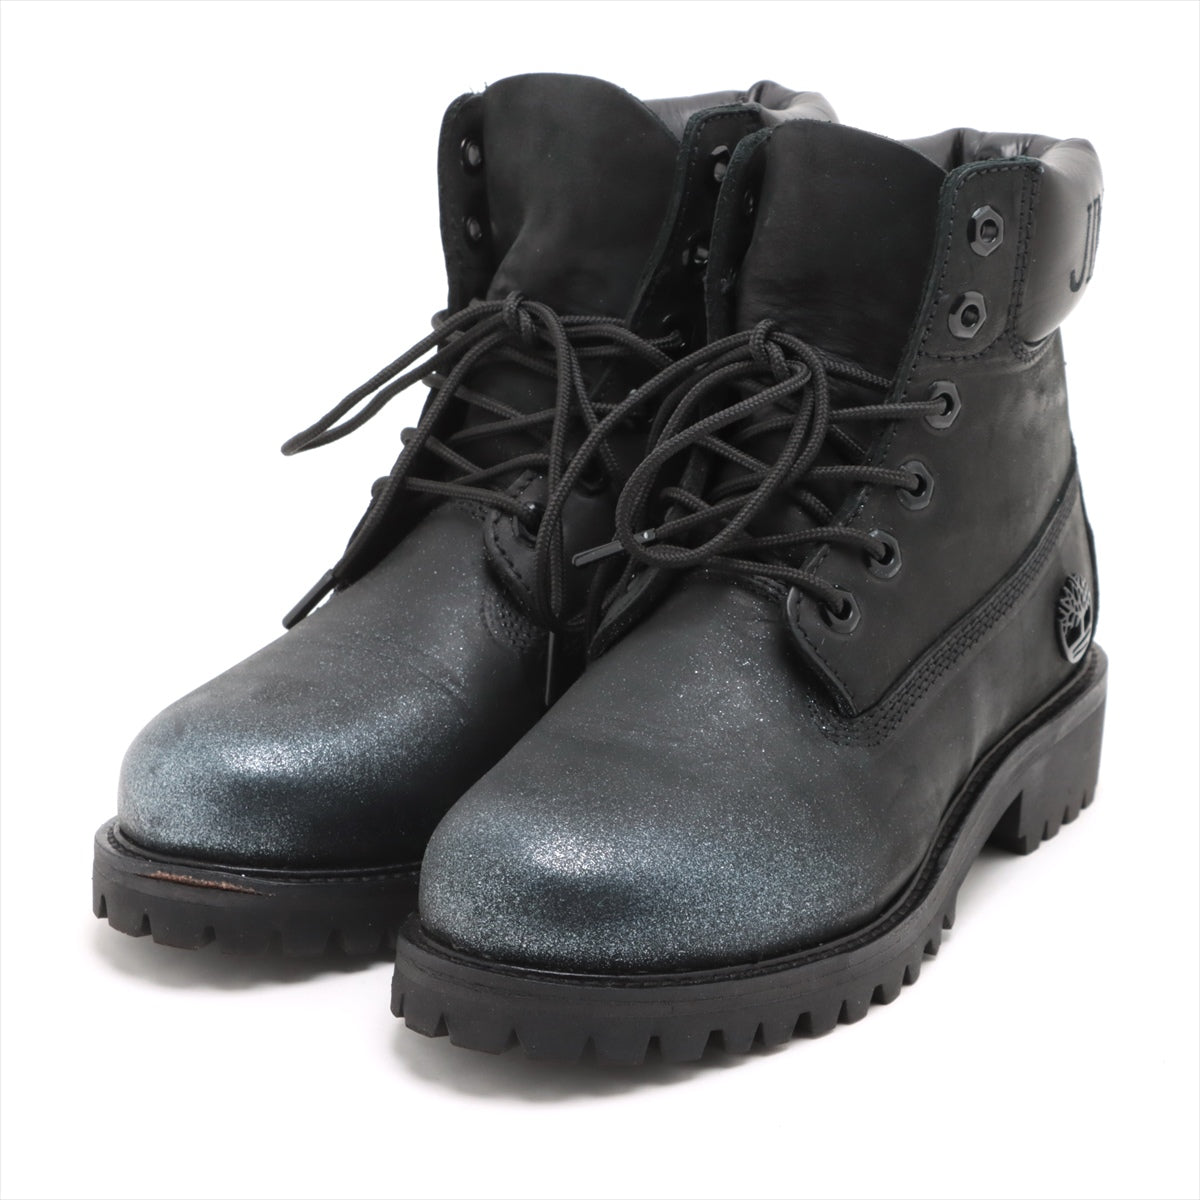 Jimmy Choo x Timberland Leather Short Boots 6 Ladies' Black premium high cut boots Box Included